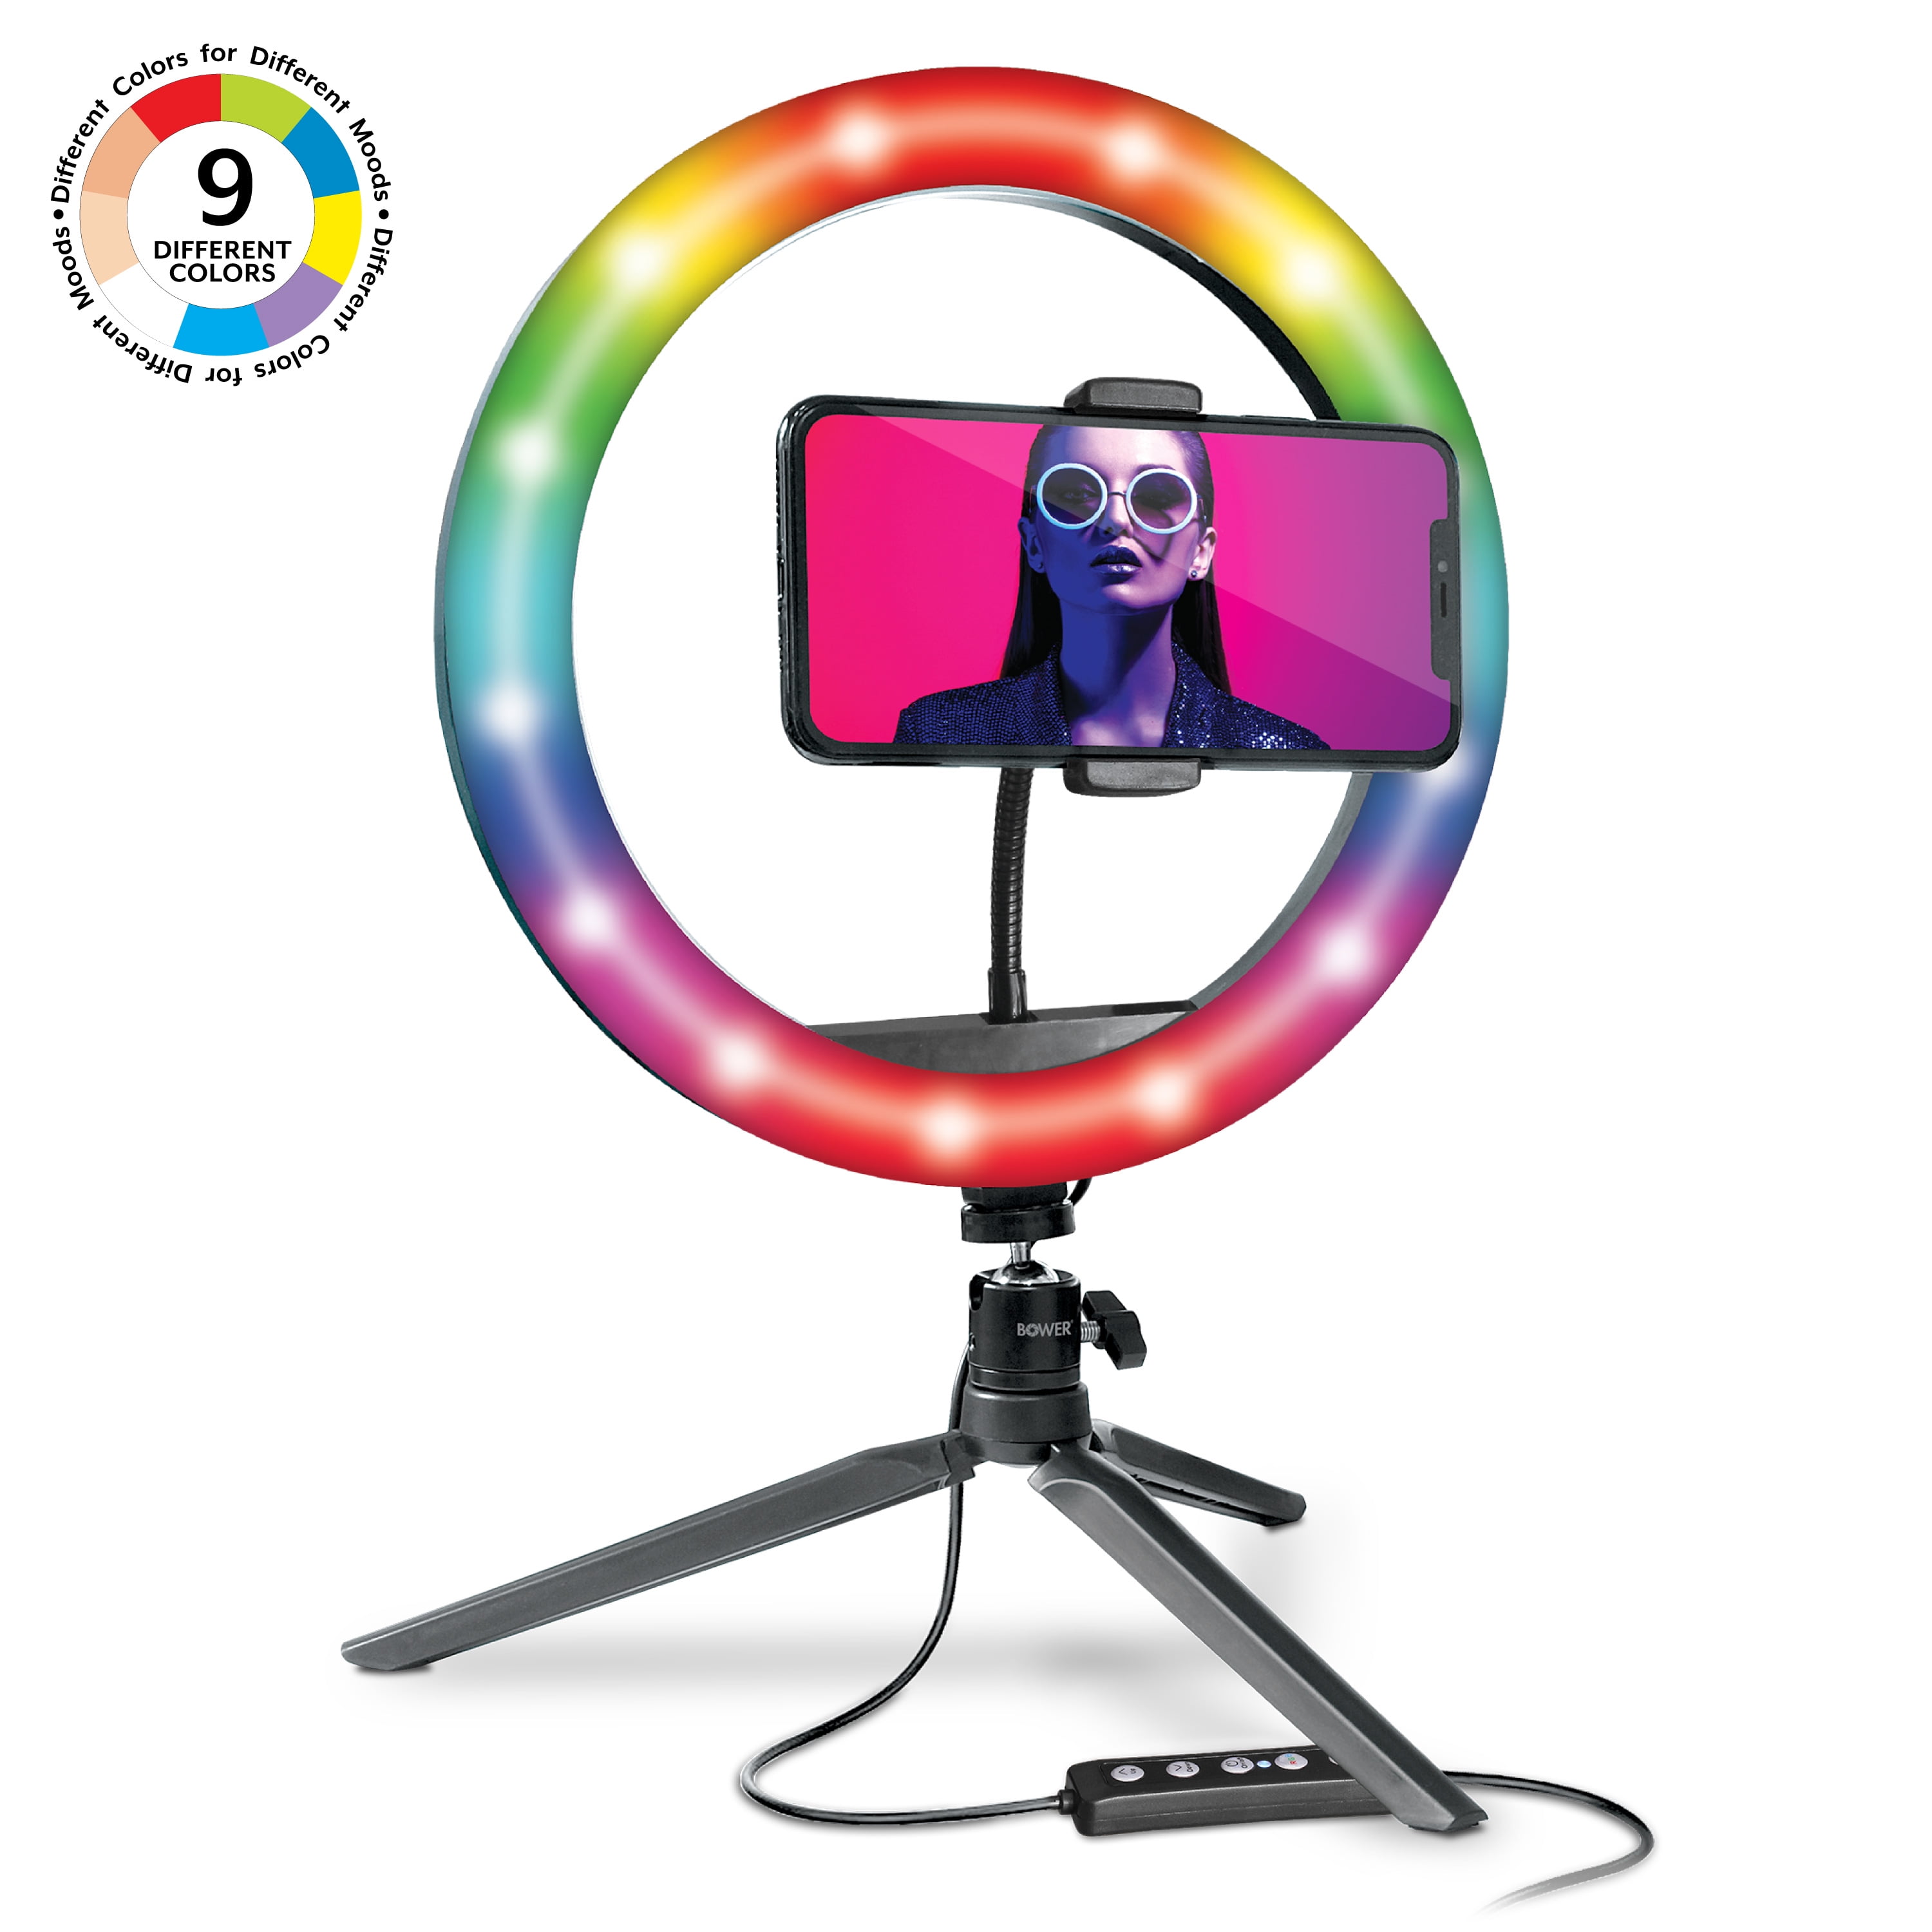 Bower 10" RGB Mobile Selfie LED Ring Light Studio Kit with Special Effects; Black